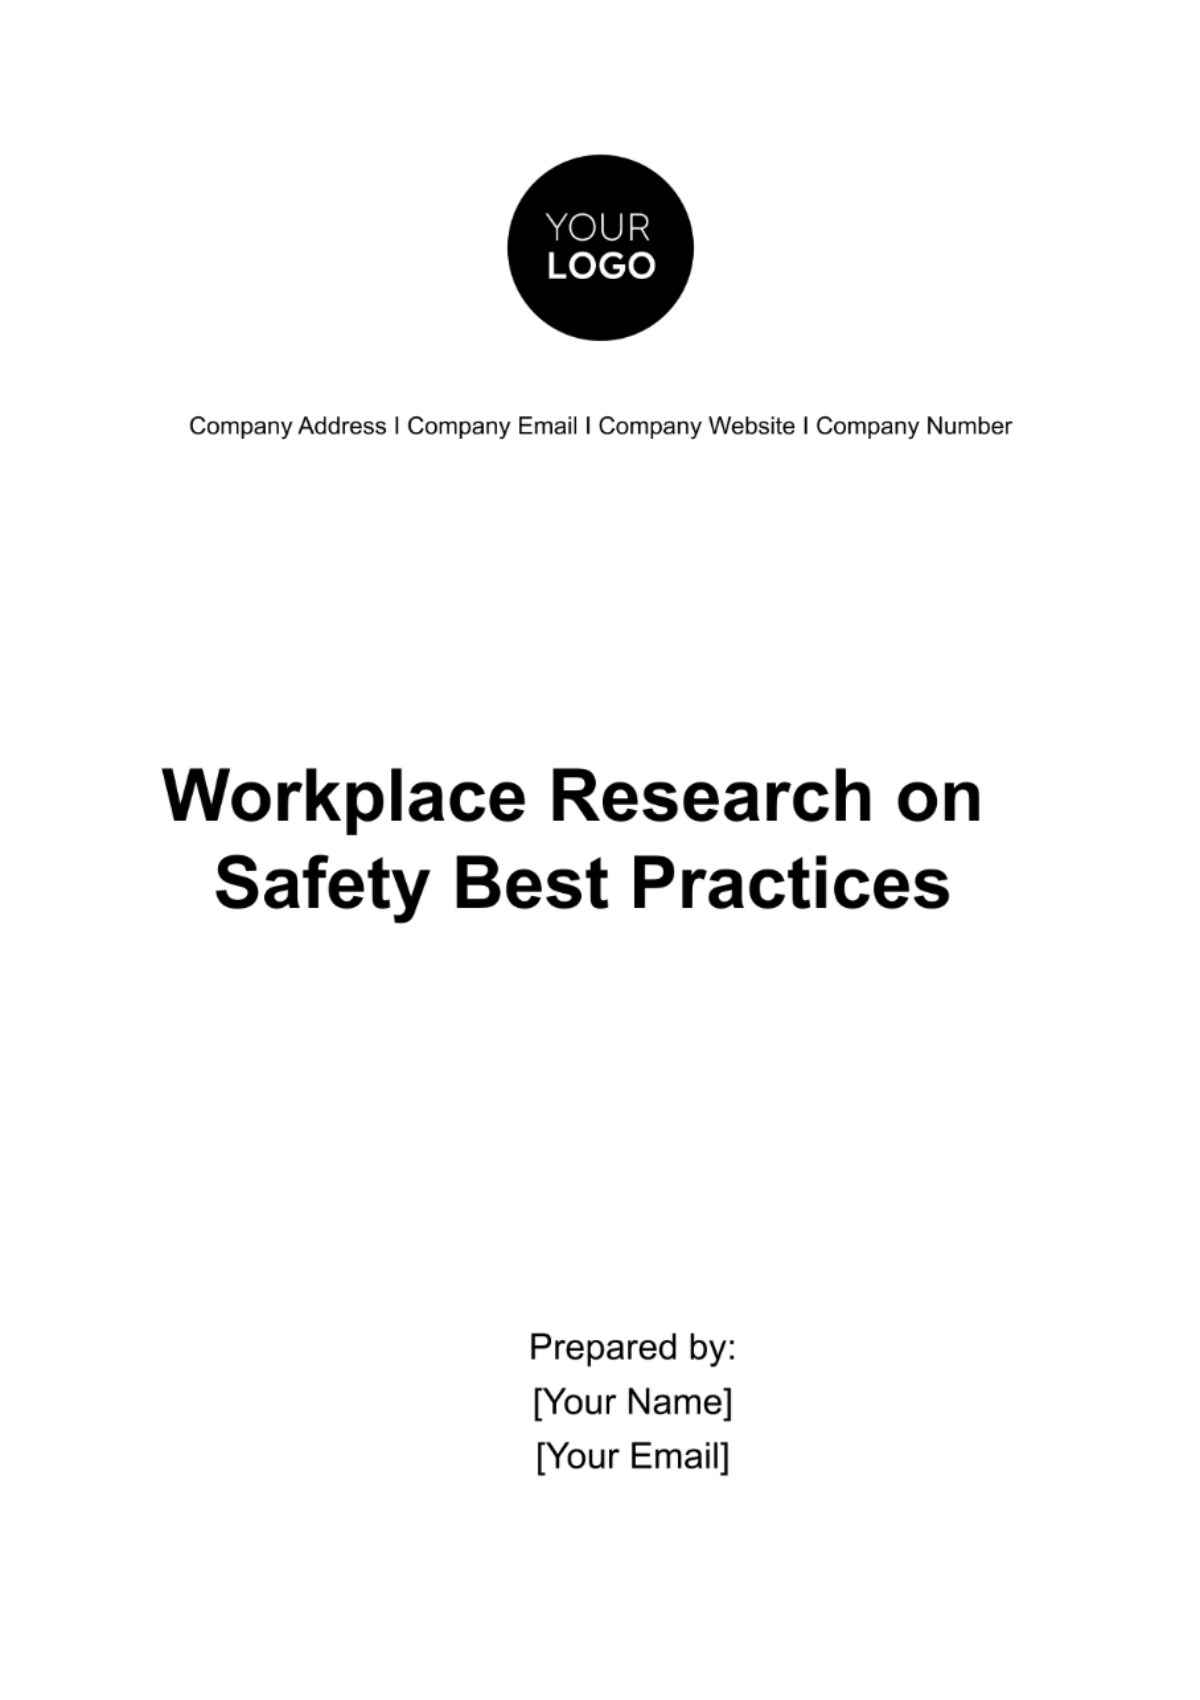 Free Workplace Research on Safety Best Practices Template